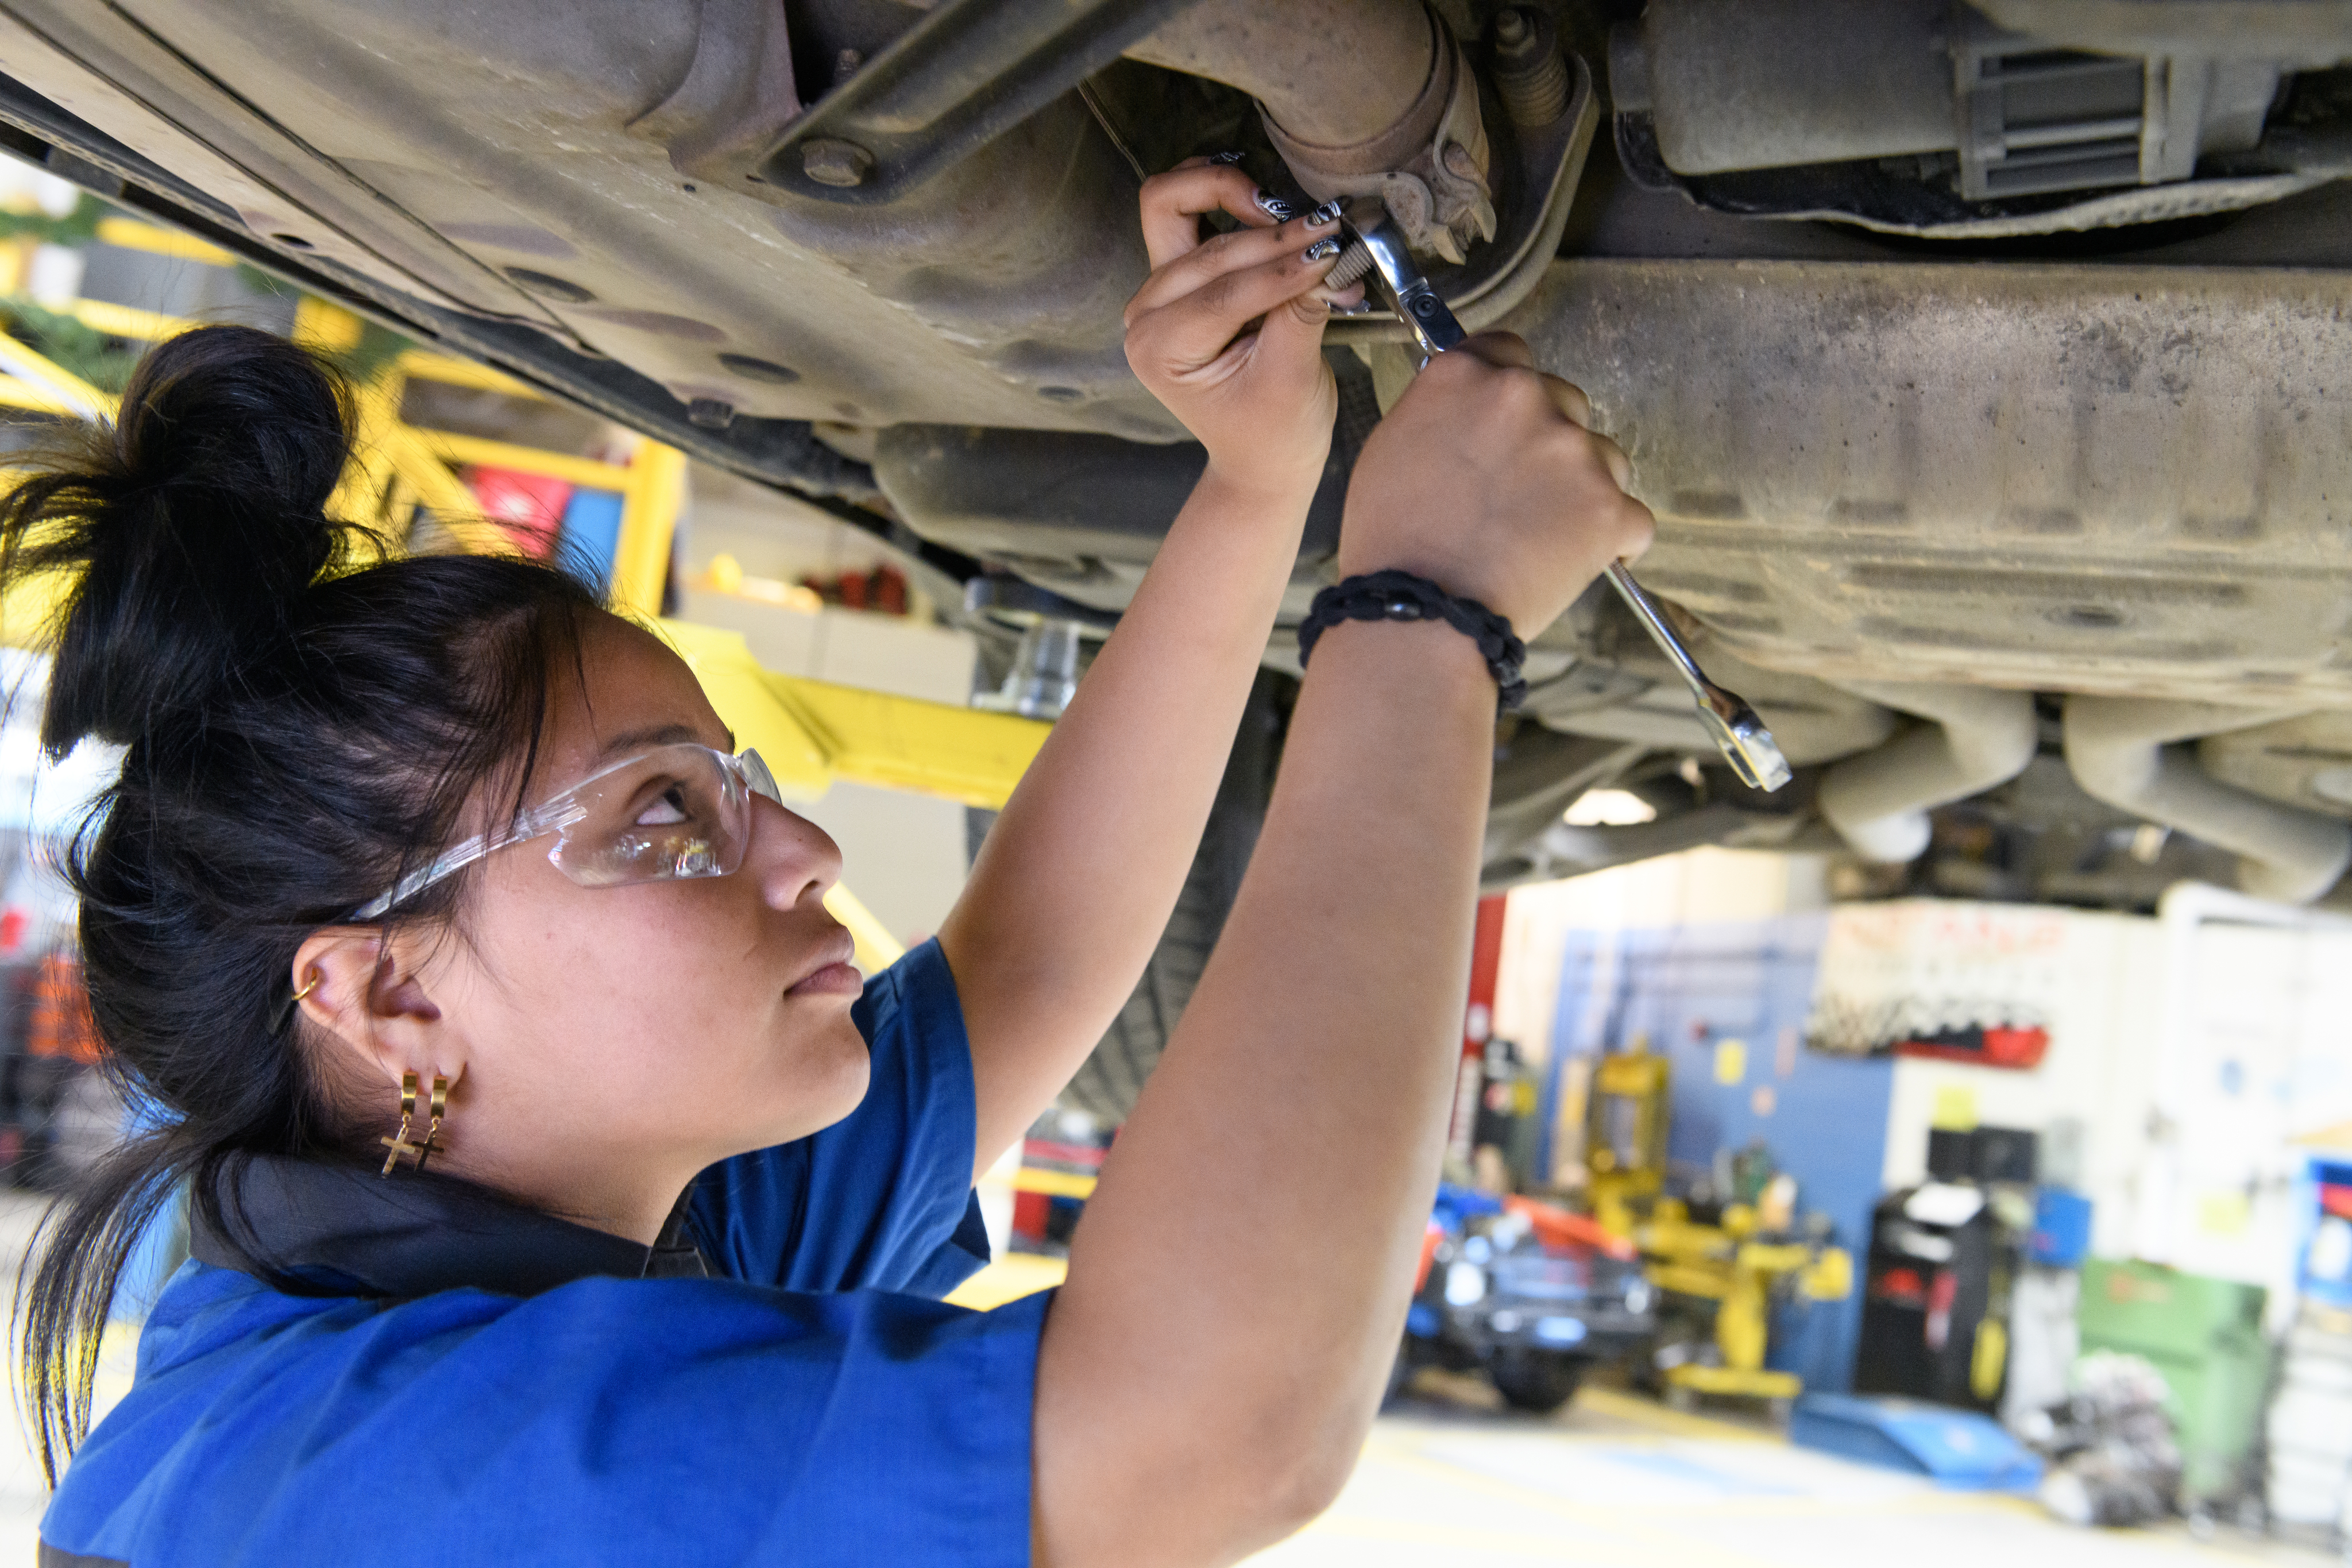 Female Automotive Technology student stands under a hoisted car, holding a wrench.